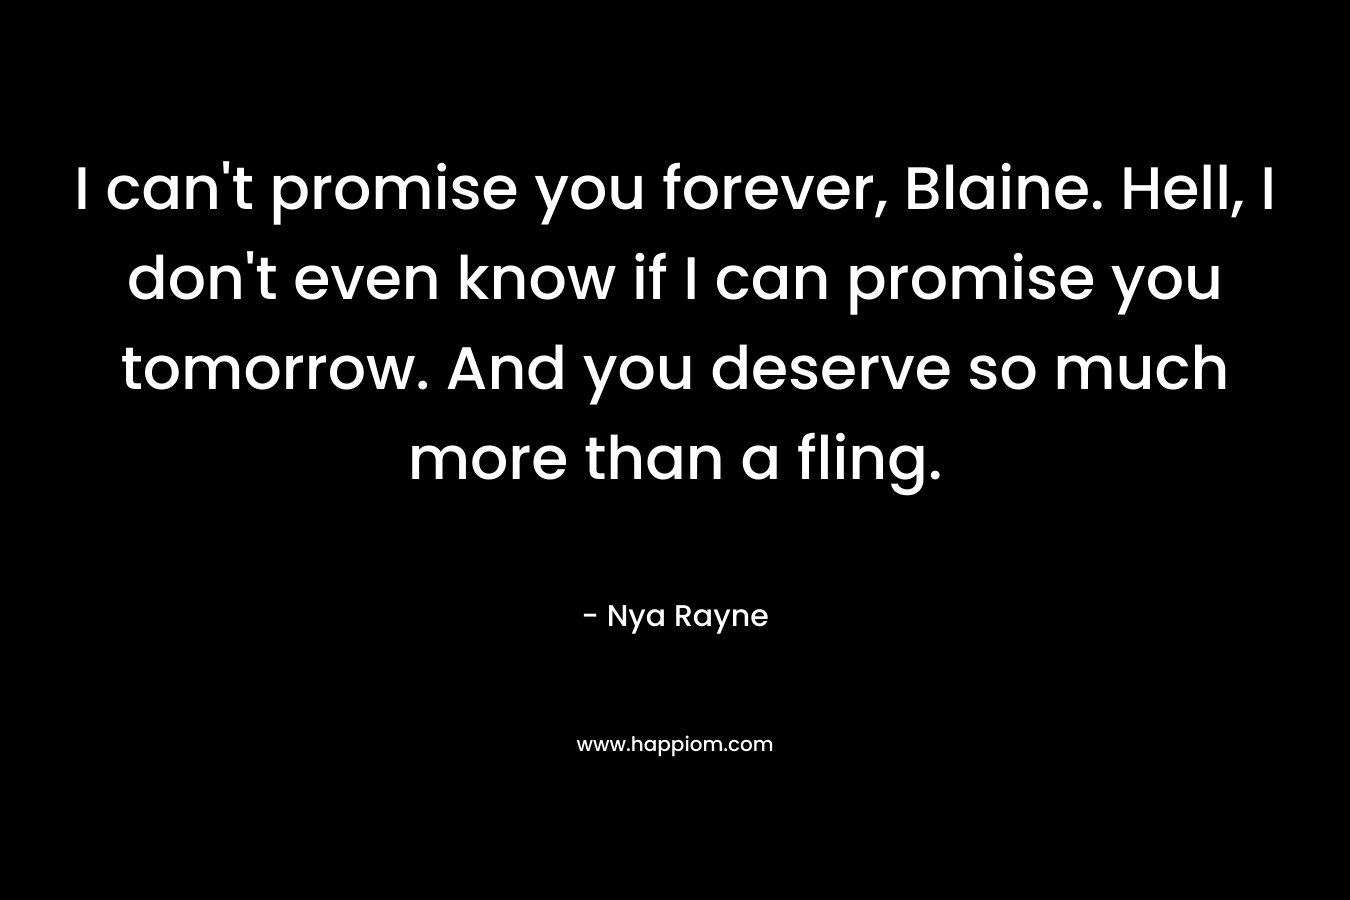 I can't promise you forever, Blaine. Hell, I don't even know if I can promise you tomorrow. And you deserve so much more than a fling.